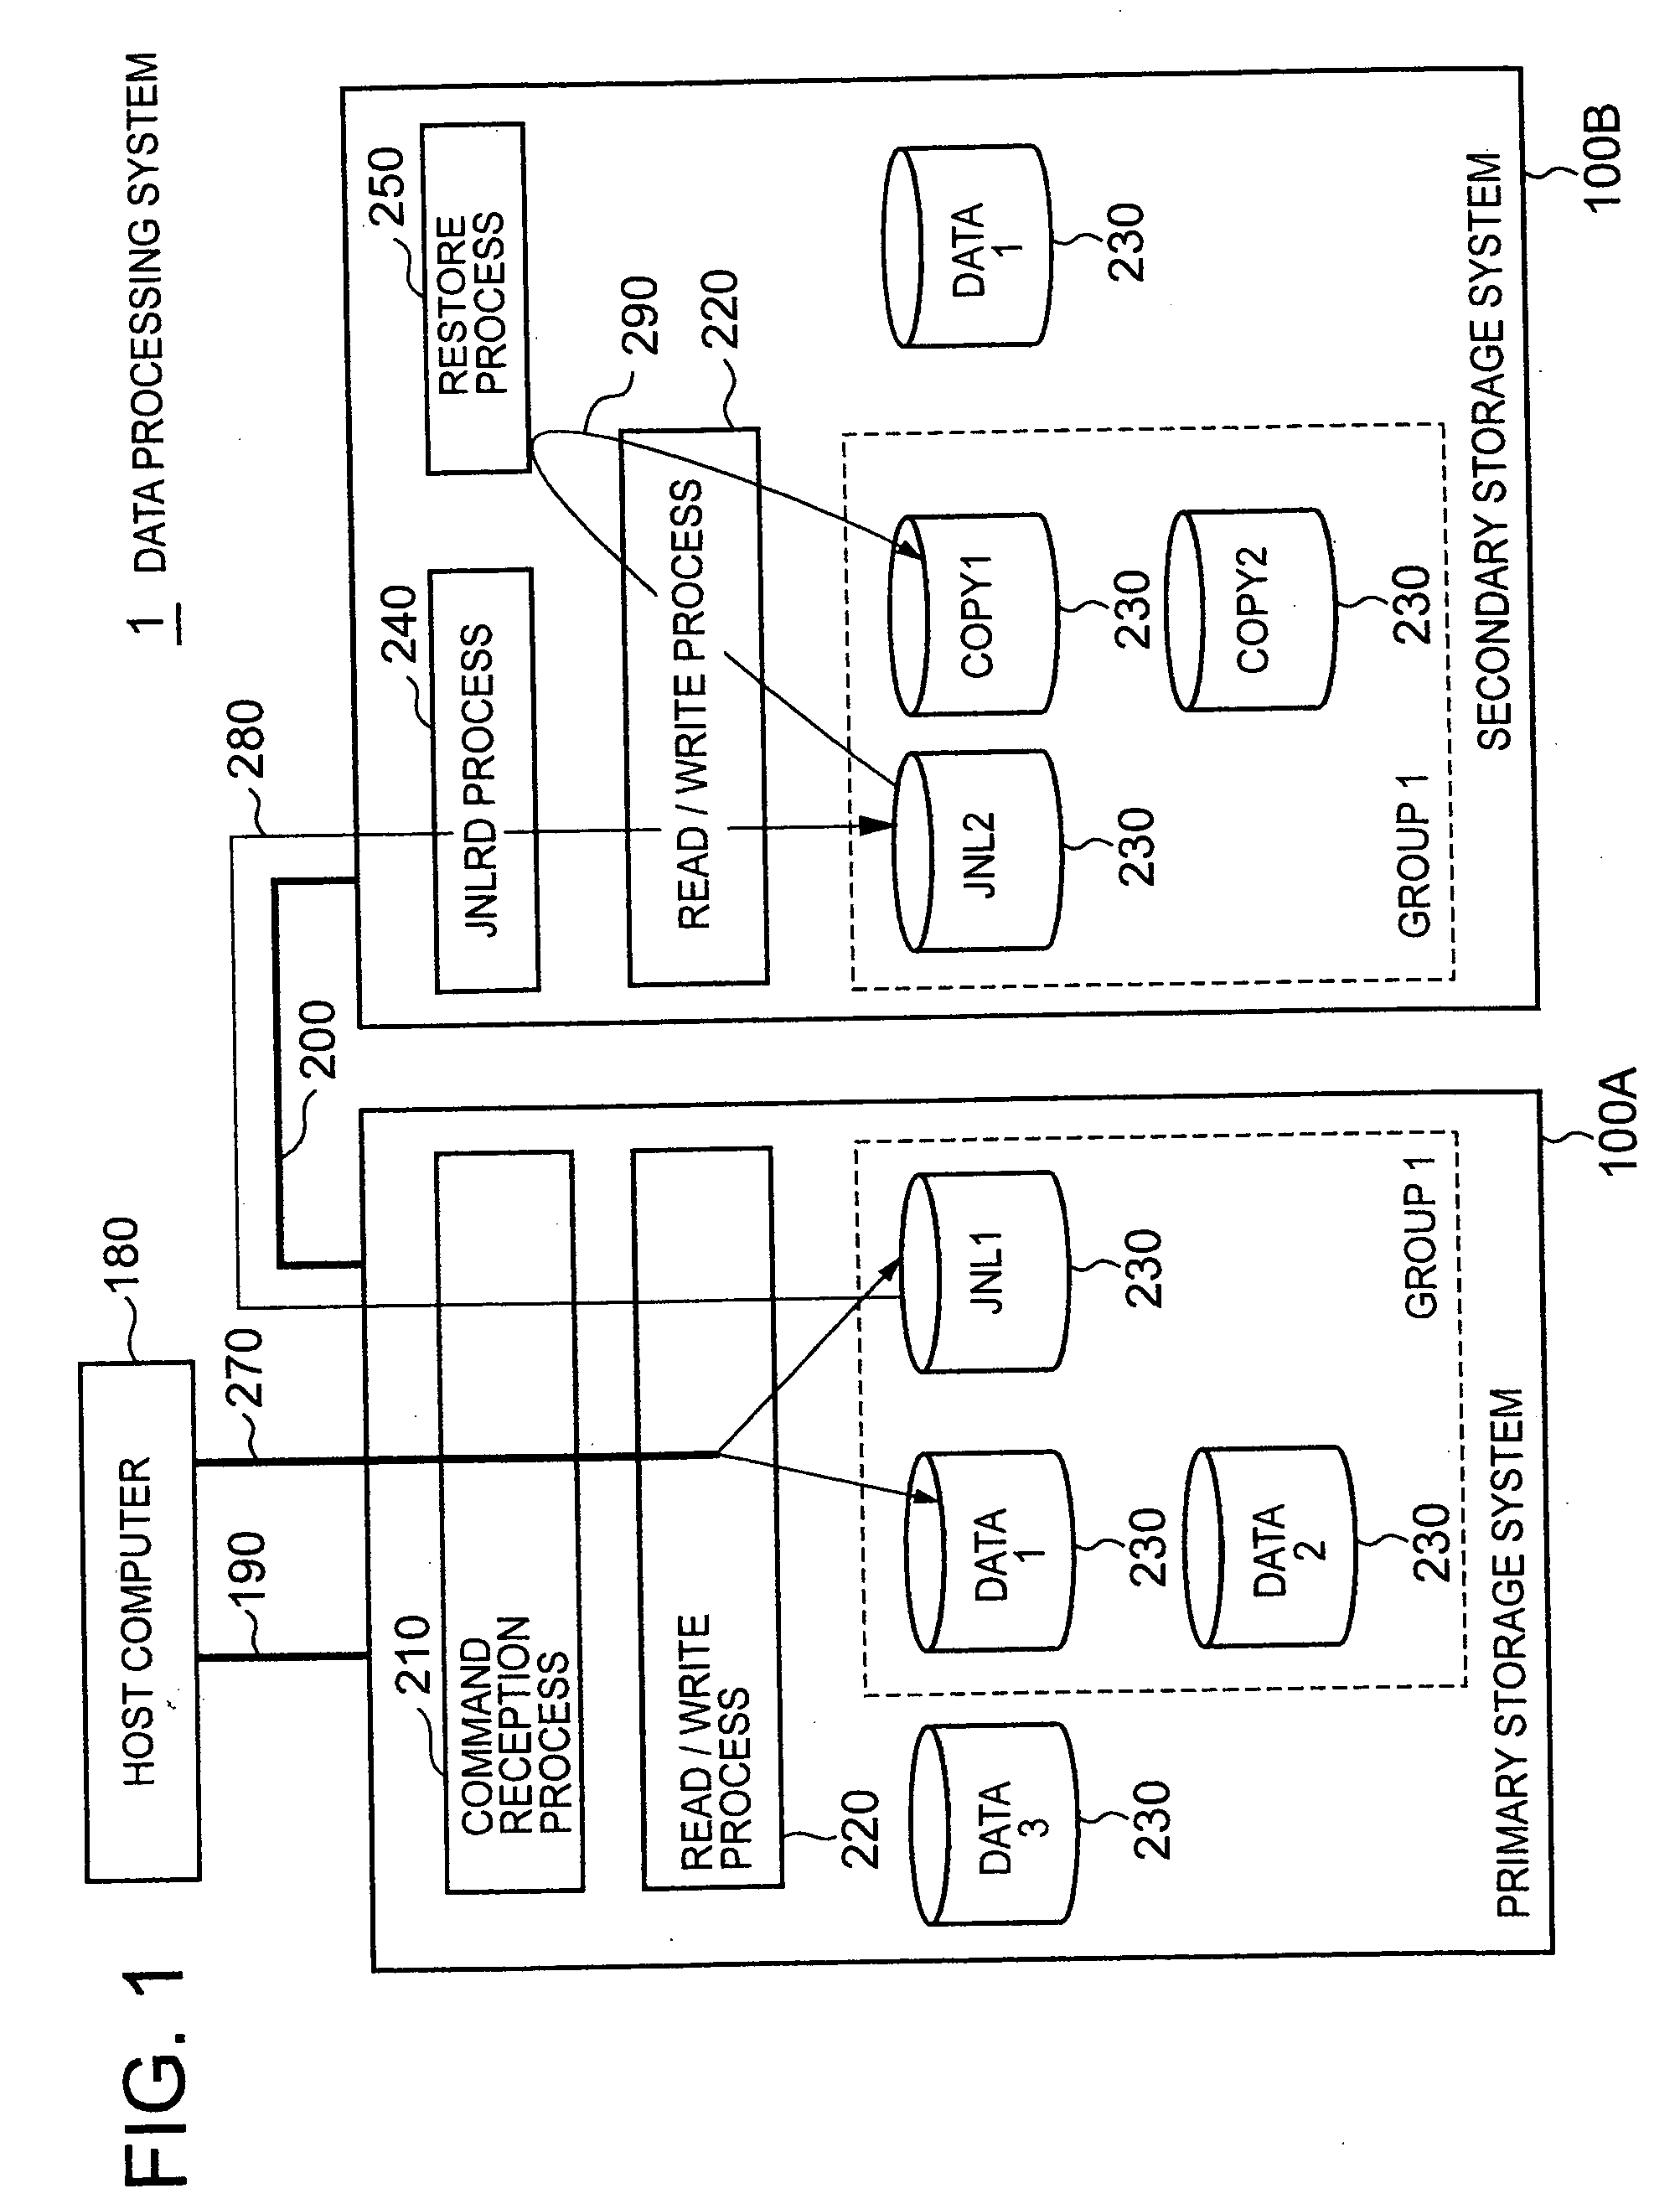 Storage system and data processing system